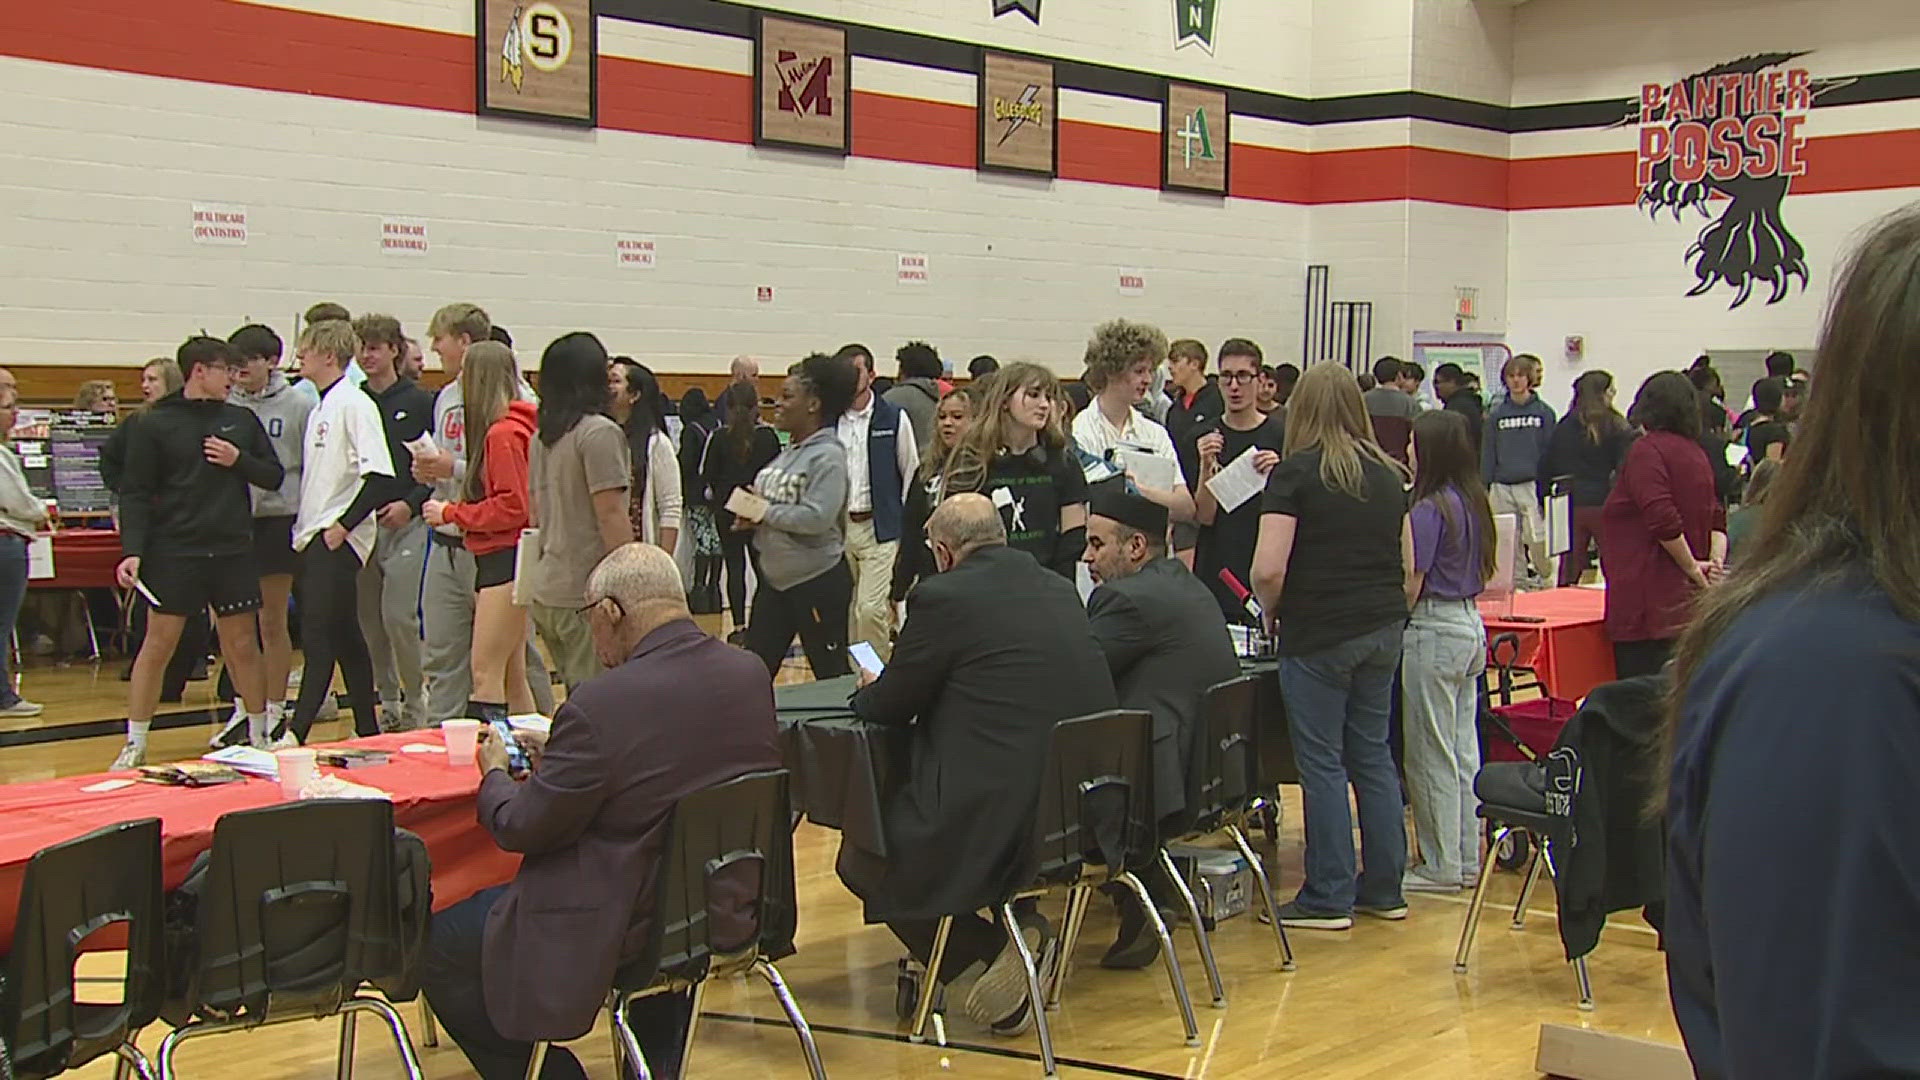 Professionals from more than 100 jobs and careers got to interact with students and share their knowledge.